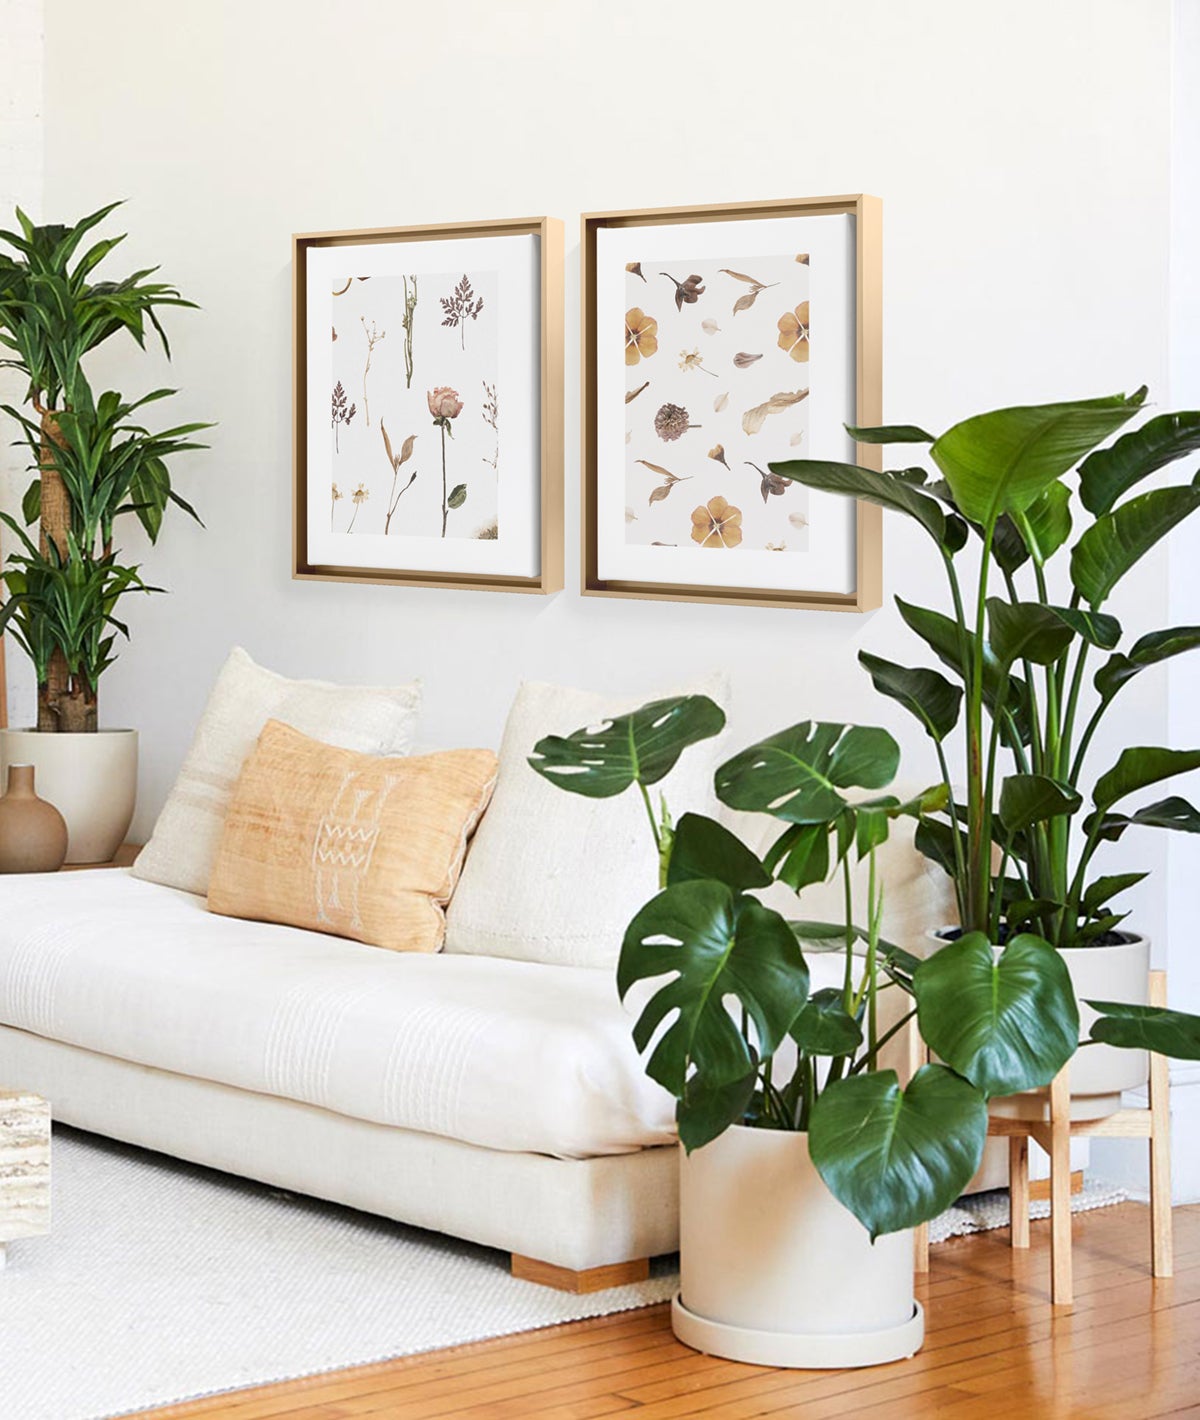 Framed Canvas prints of dried botanicals hanging above couch in between Dracena and other large plants